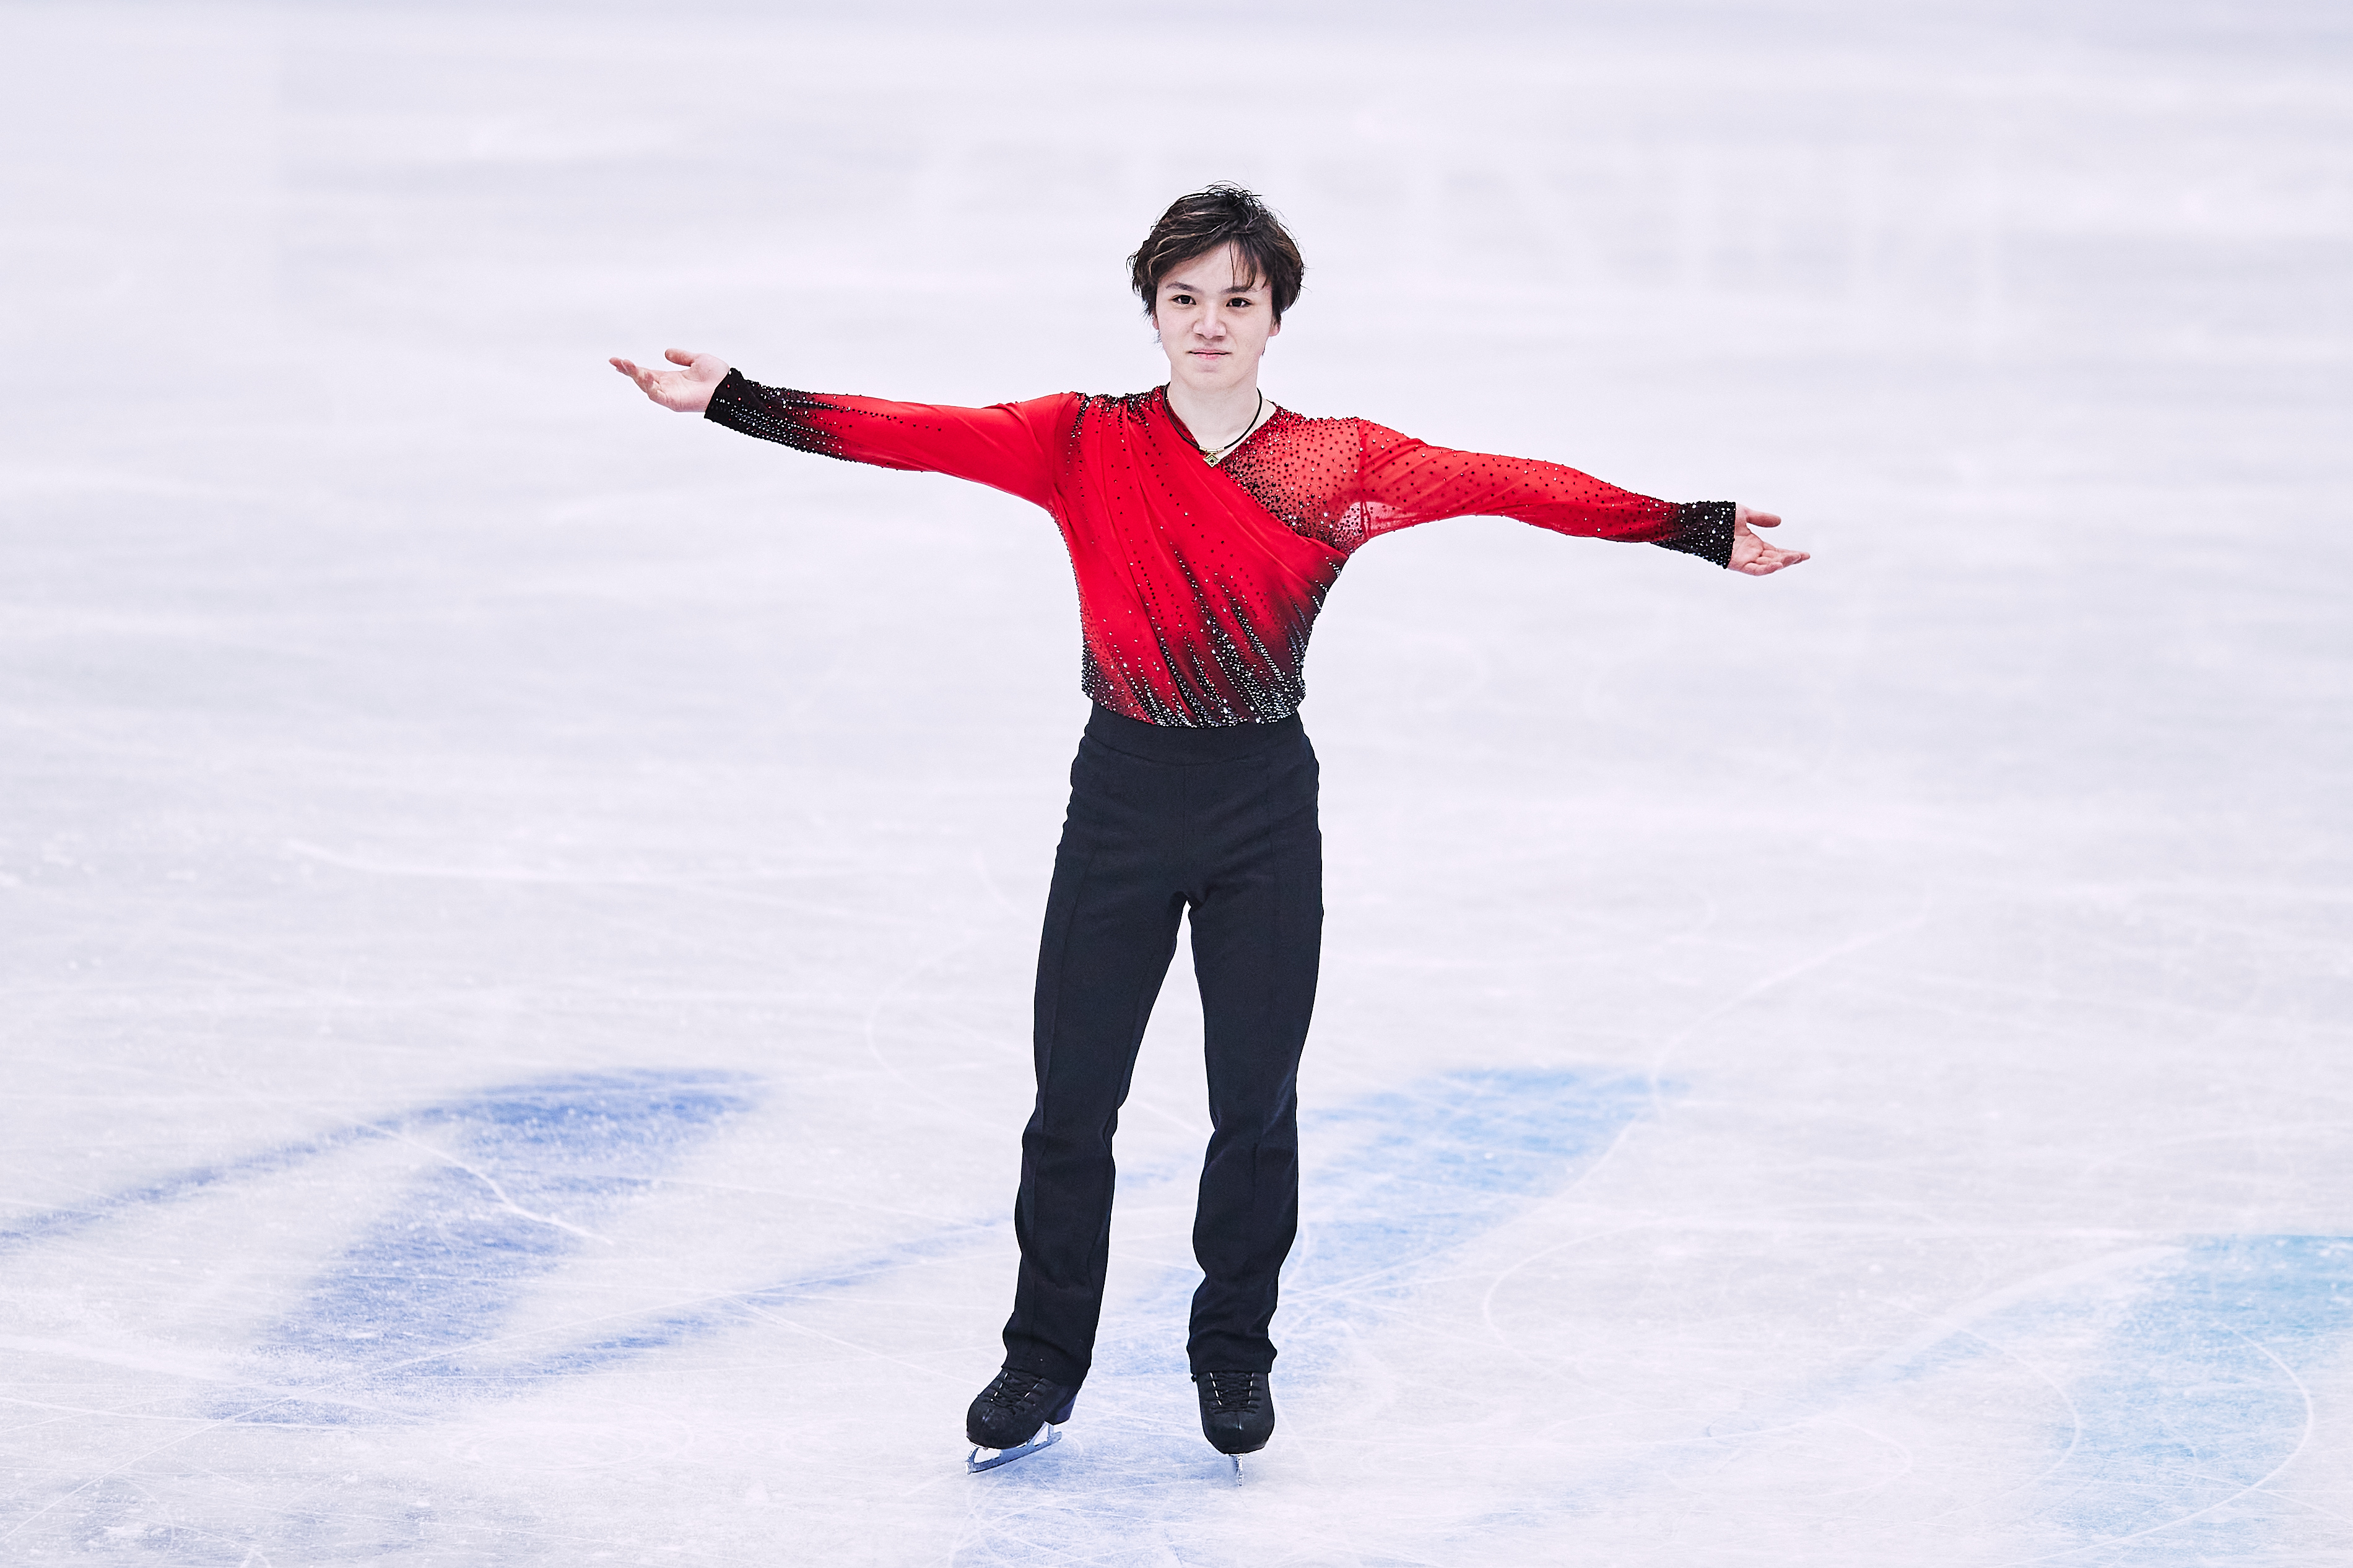 Shoma Uno Wins Mens Gold at World Figure Skating Championships 2022 After Free Skate News, Scores, Highlights, Stats, and Rumors Bleacher Report